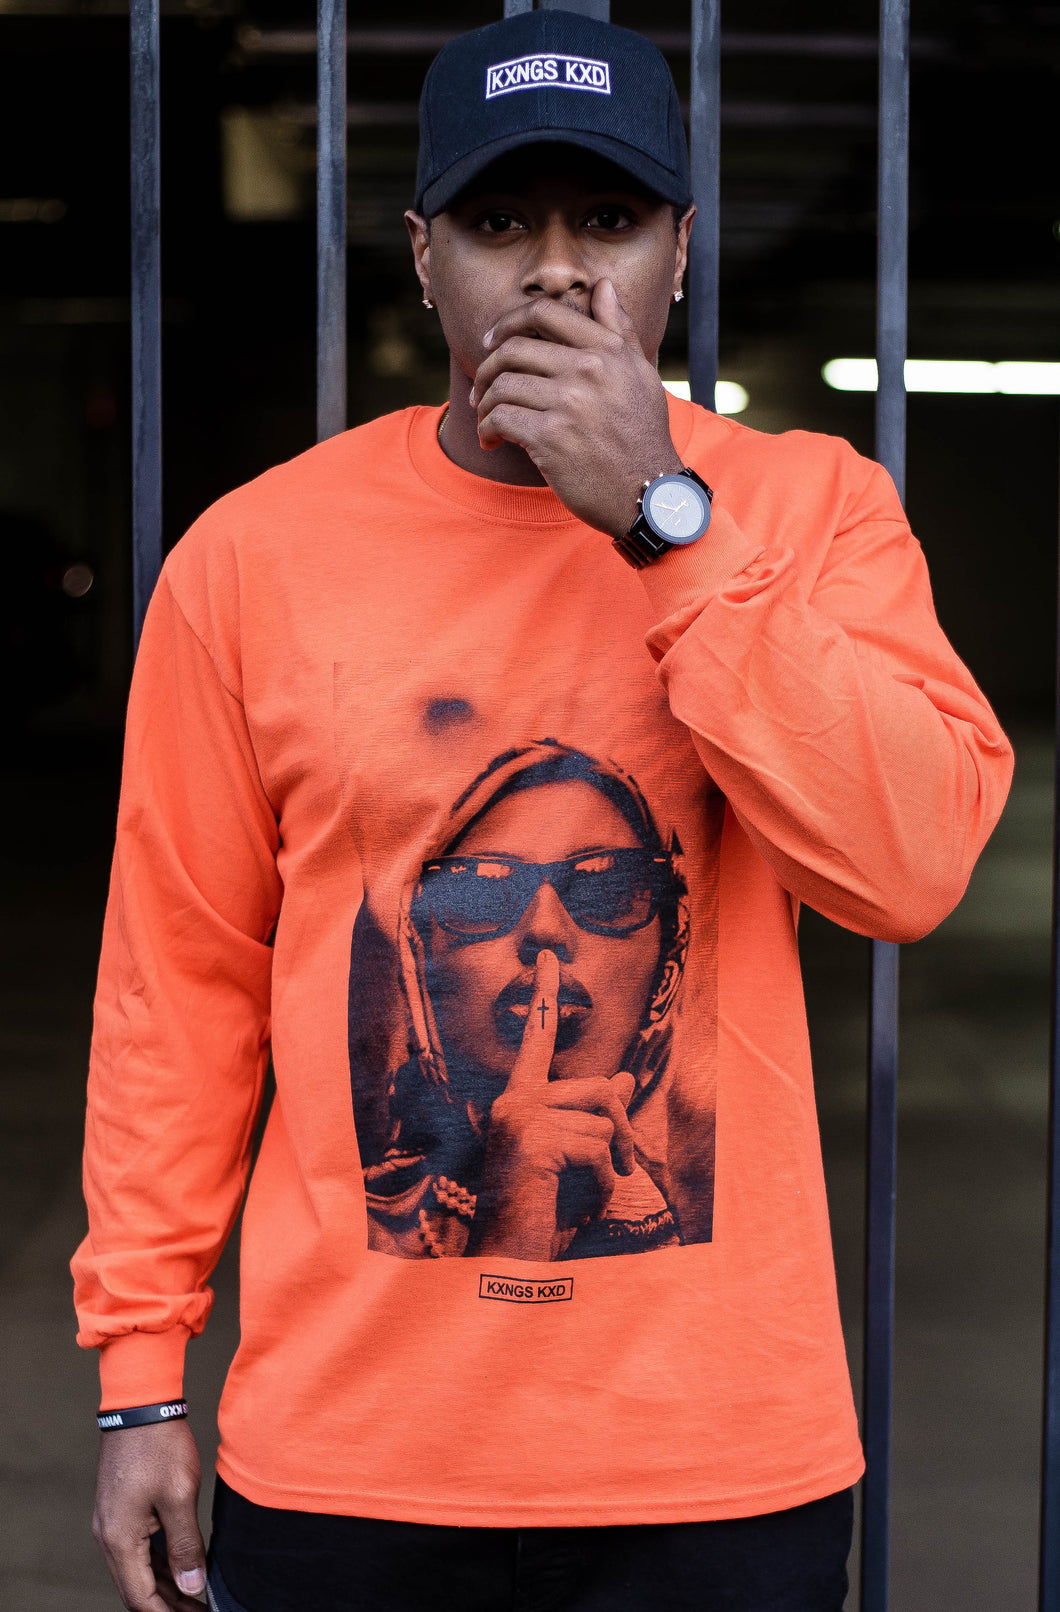 THEY DON'T WANT YOU TO PROSPER LONG SLEEVE TEE